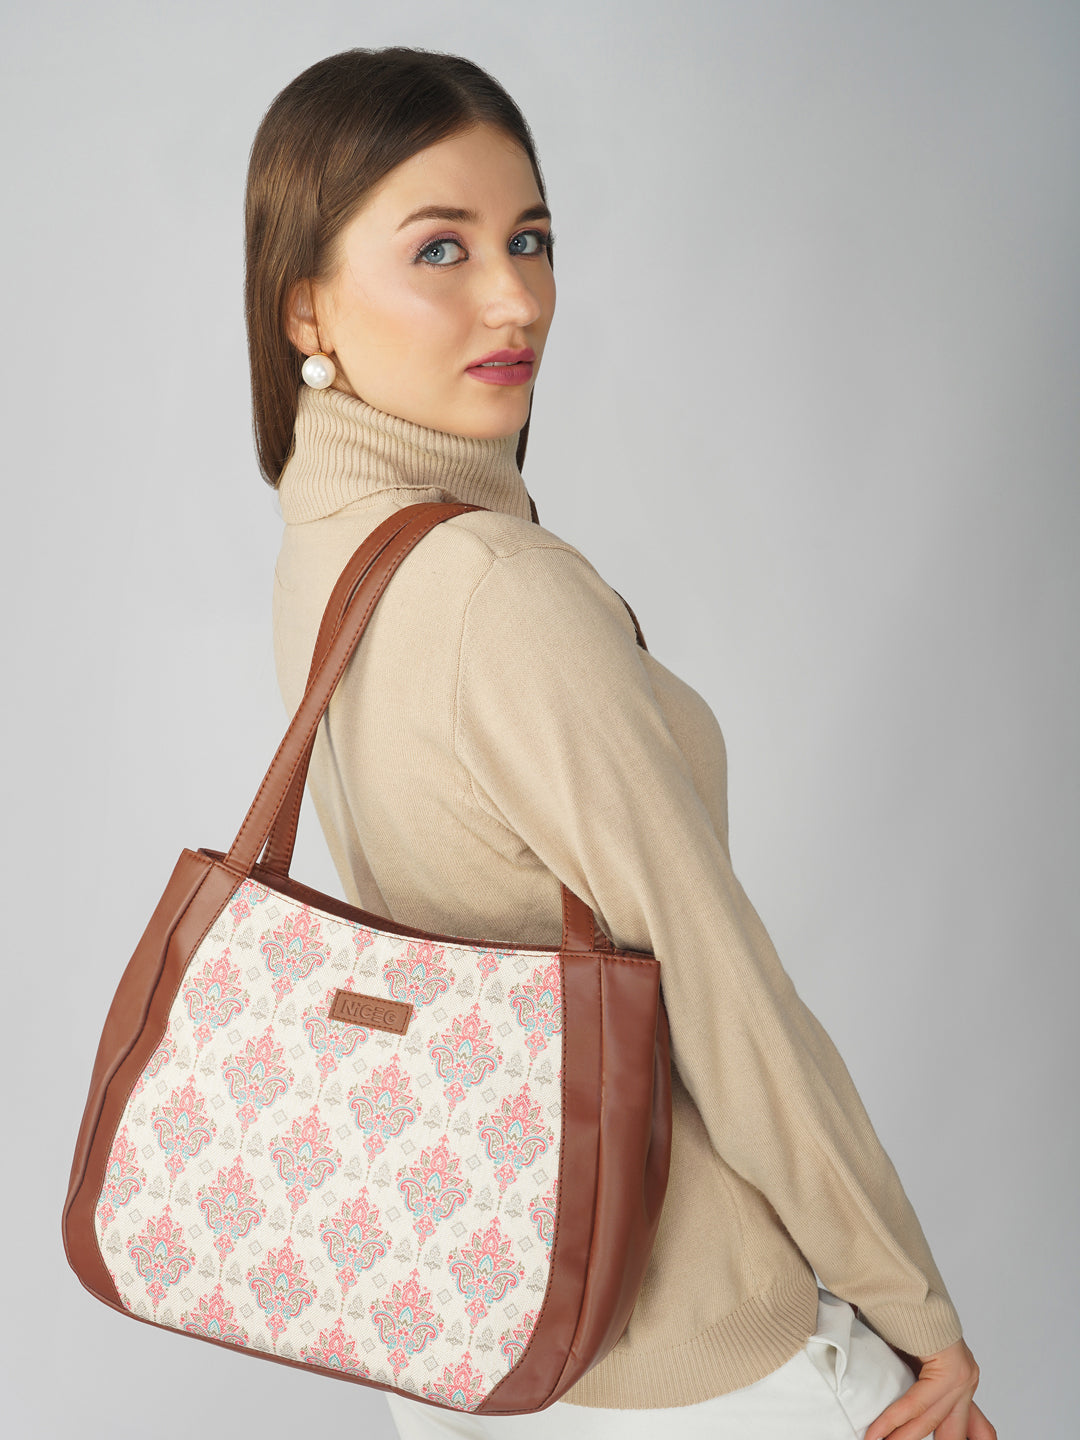 NiceG Orchid Tote Bags For Women & Girls